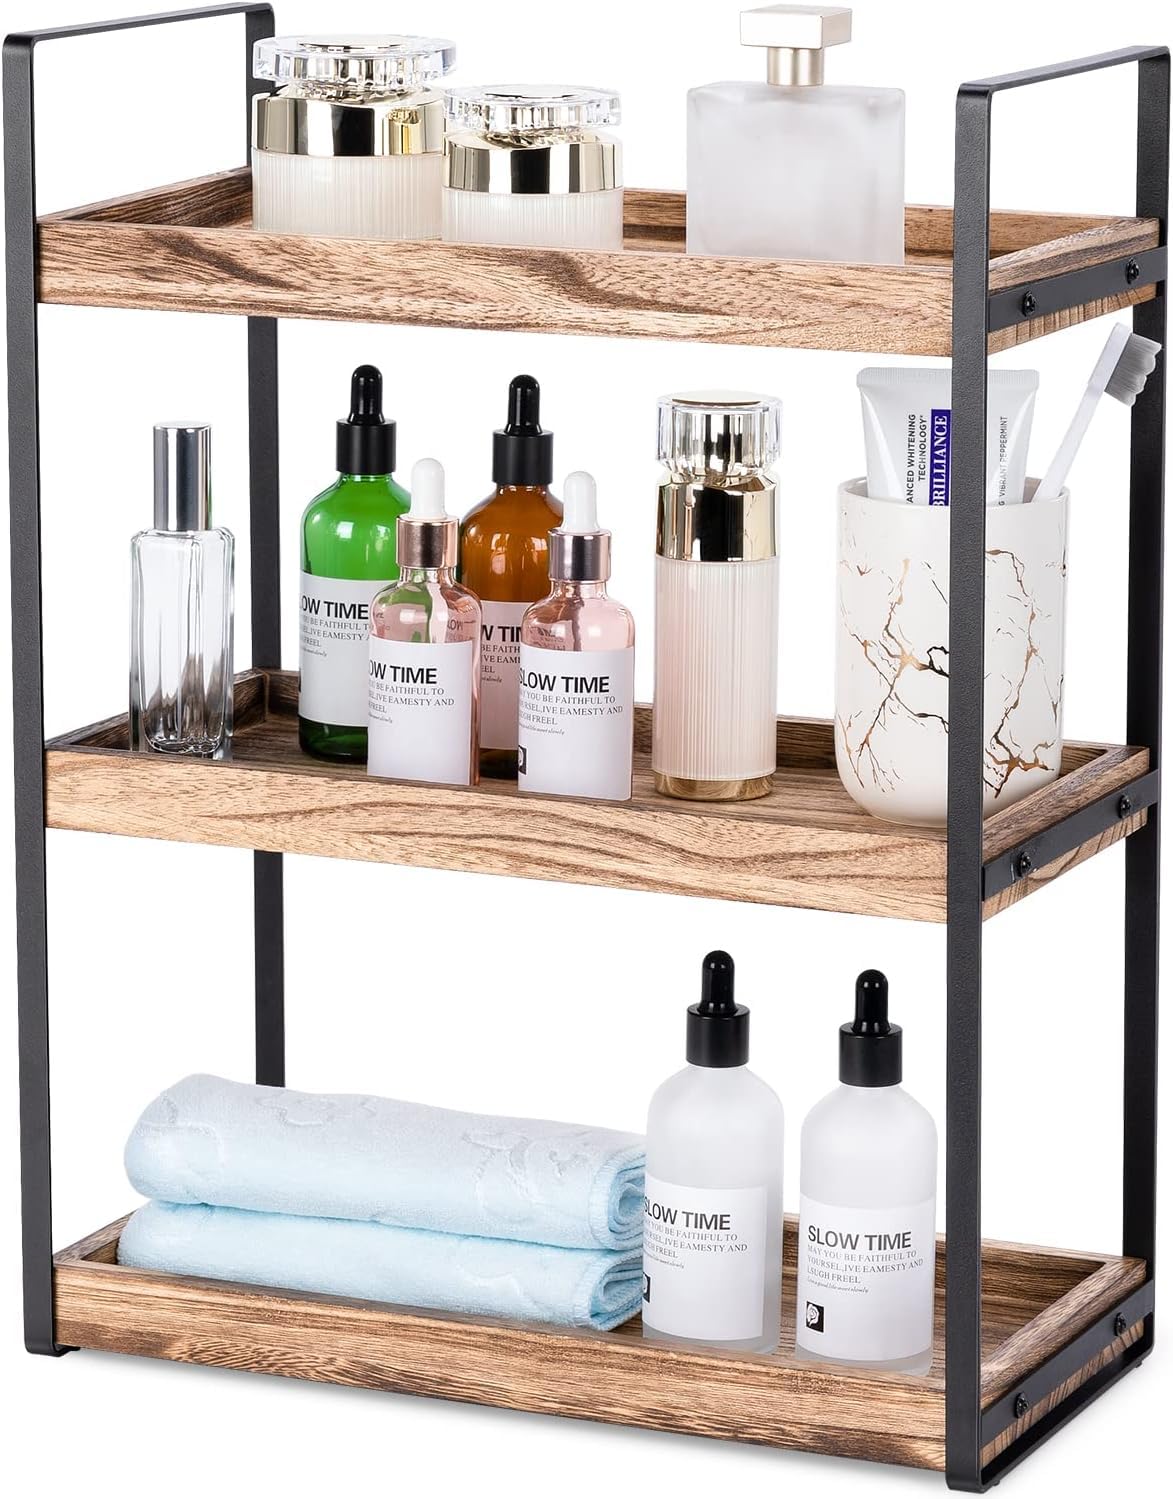 OFRANK 3-Tier Countertop Organizer for Bathroom Counter Stylish Wood Bathroom Vanity Organizer Shelf Storage - The Perfect Addition to Your Bathroom Counter Decor (3 Tiers)